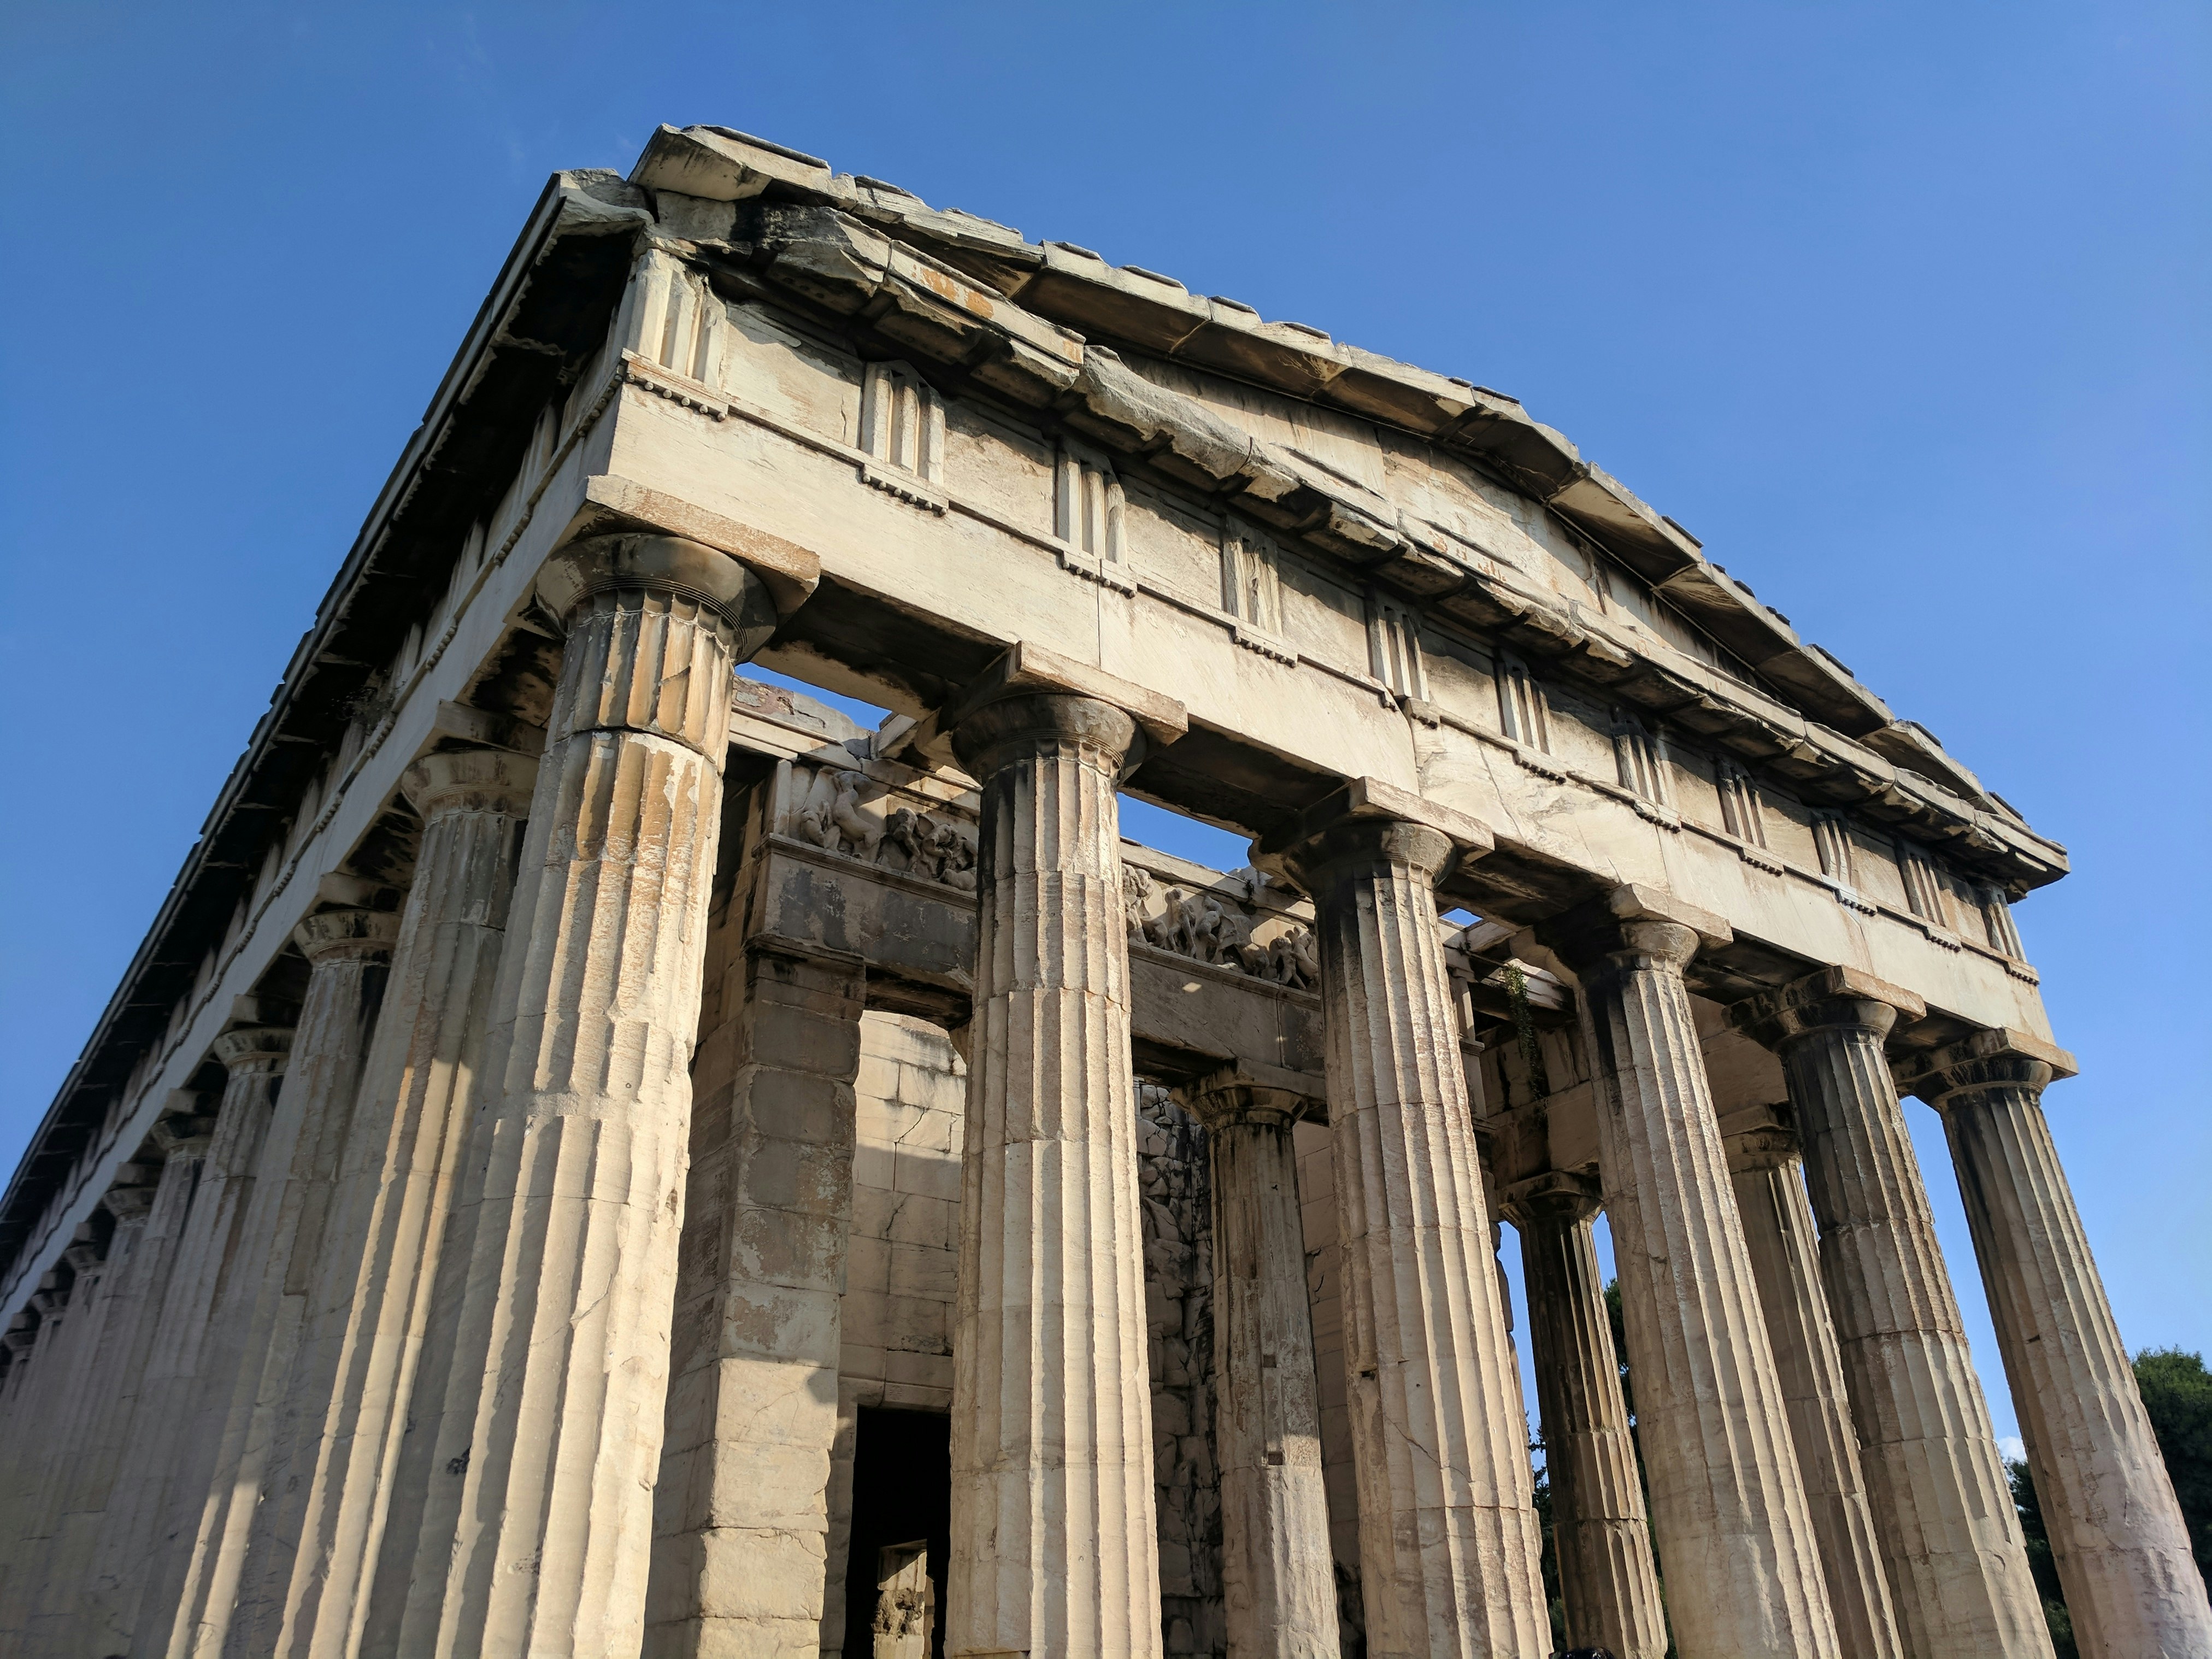 An exterior shot looking up at the columns and inner roofline friezes of the Parthenon shows how sculptures once decorated almost every surface of the structure 